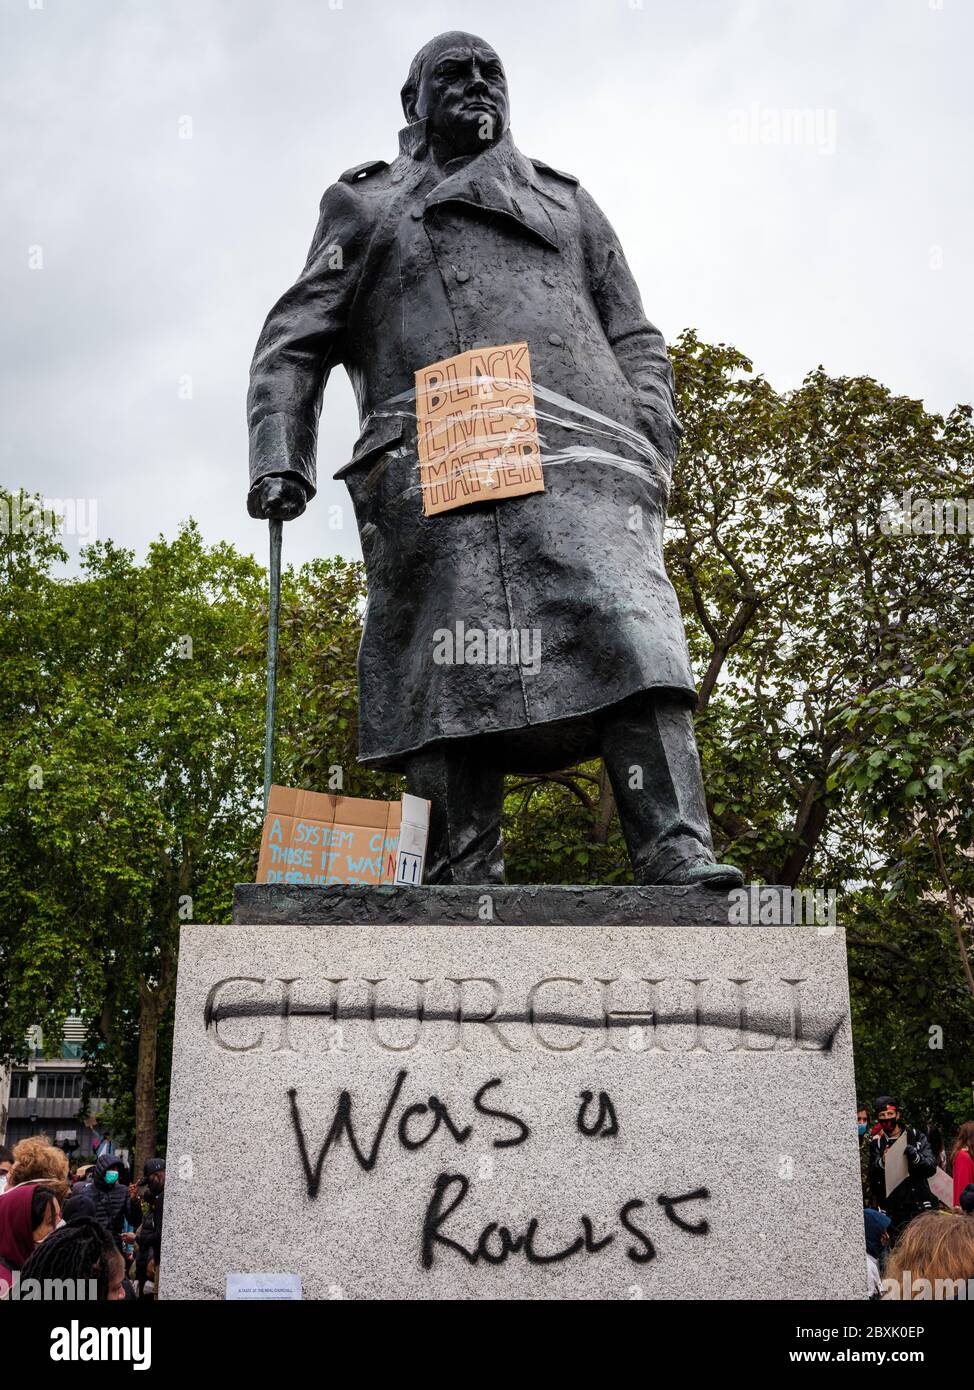 London, UK. 7th June, 2020. Defaced Winston Churchill statue in Parliament Square in London.  In memory of George Floyd who was killed on the 25th May while in police custody in the US city of Minneapolis. Credit: Yousef Al Nasser Stock Photo